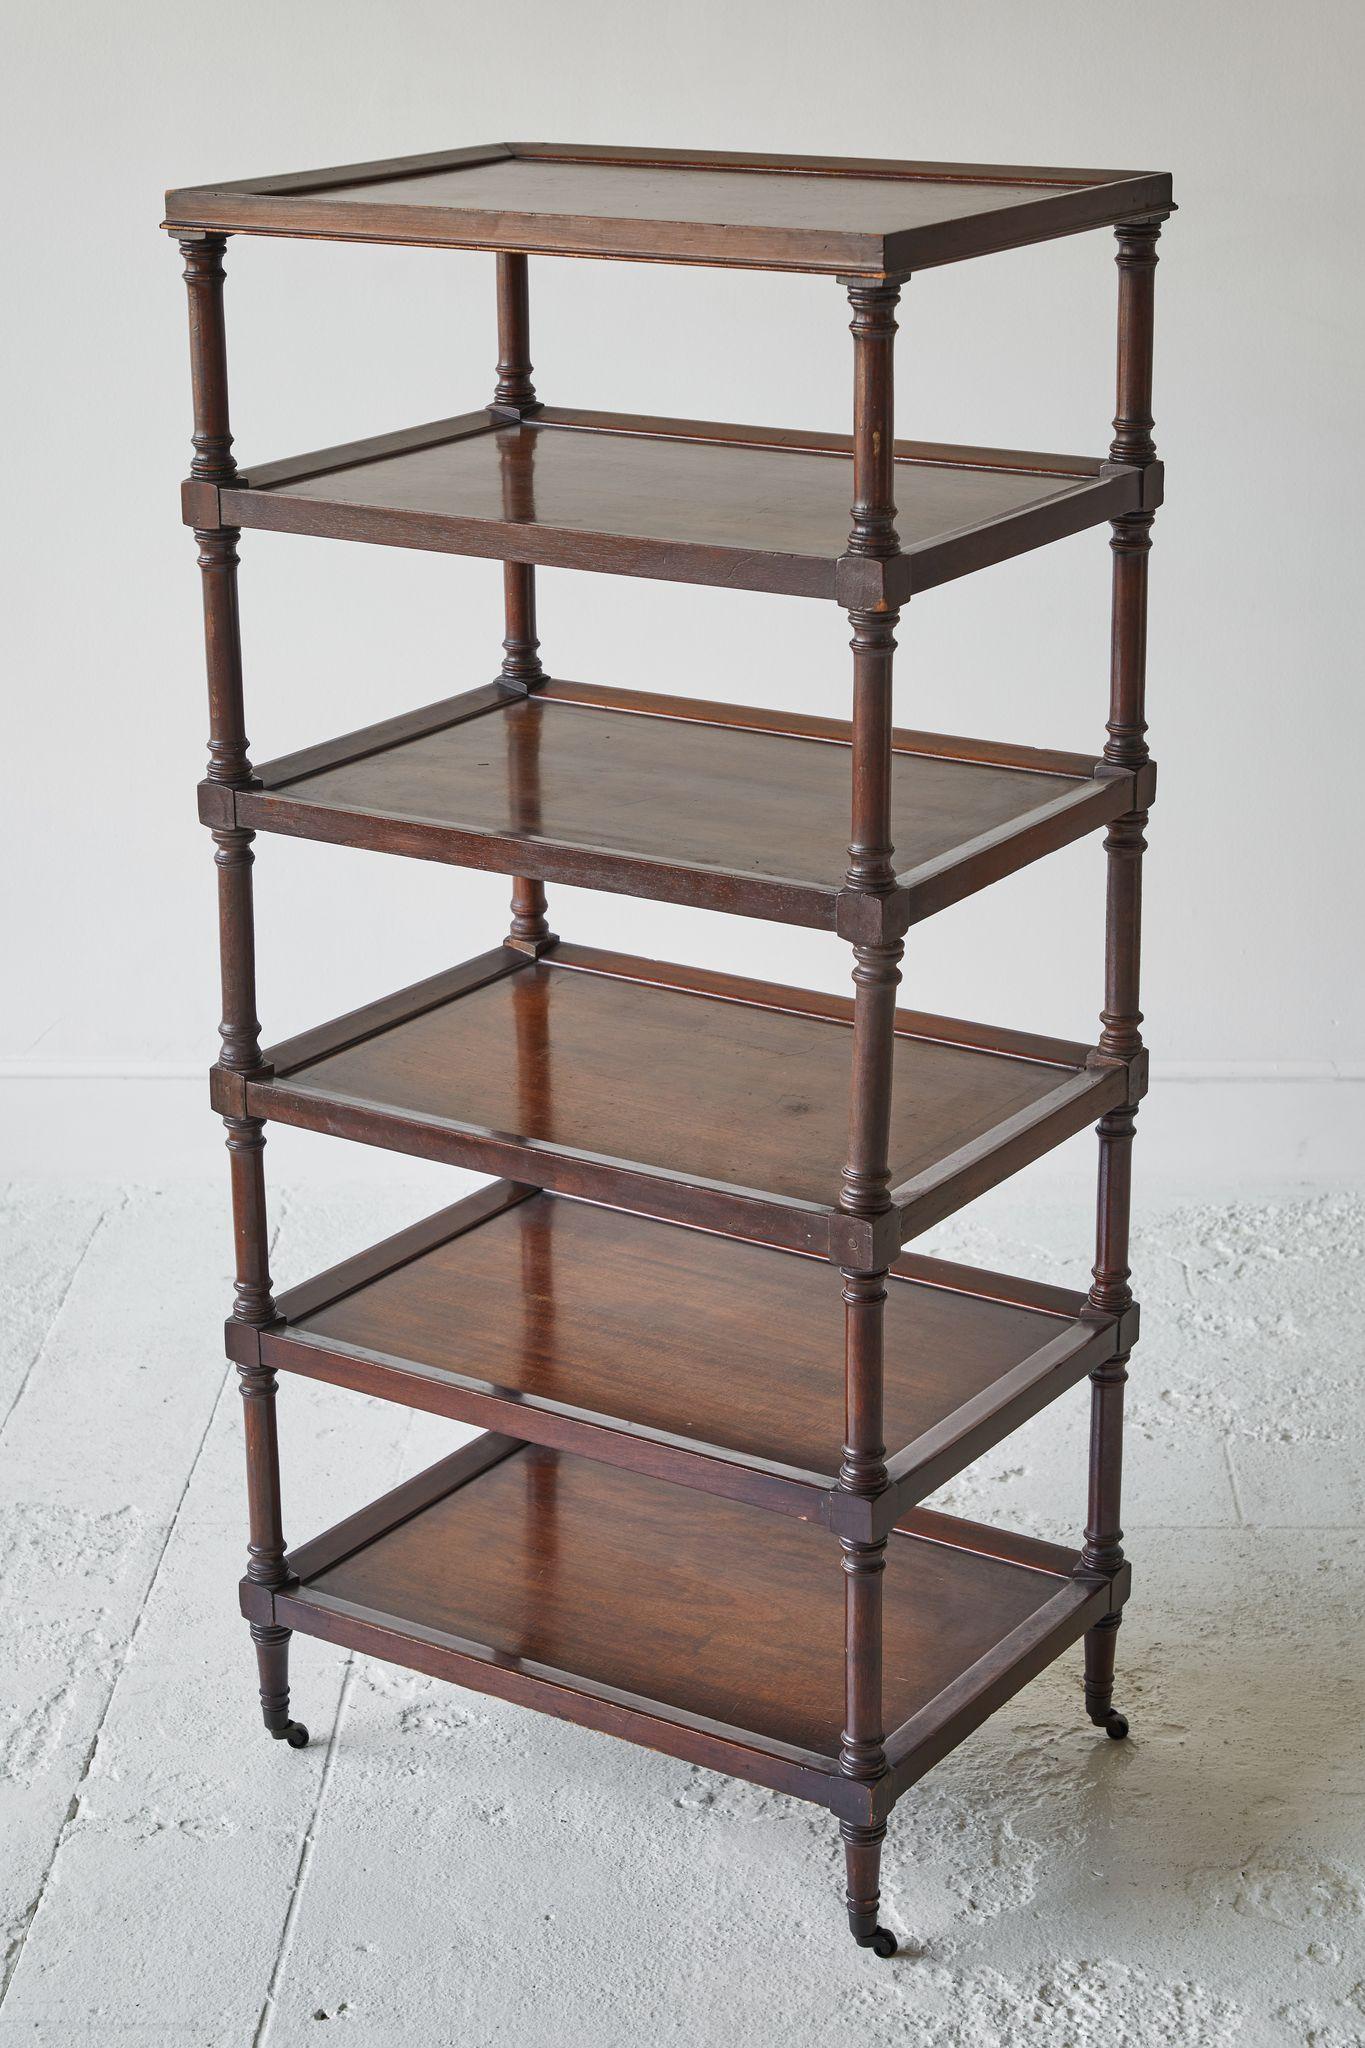 Early American étagère with six shelves, on casters with turned sides.